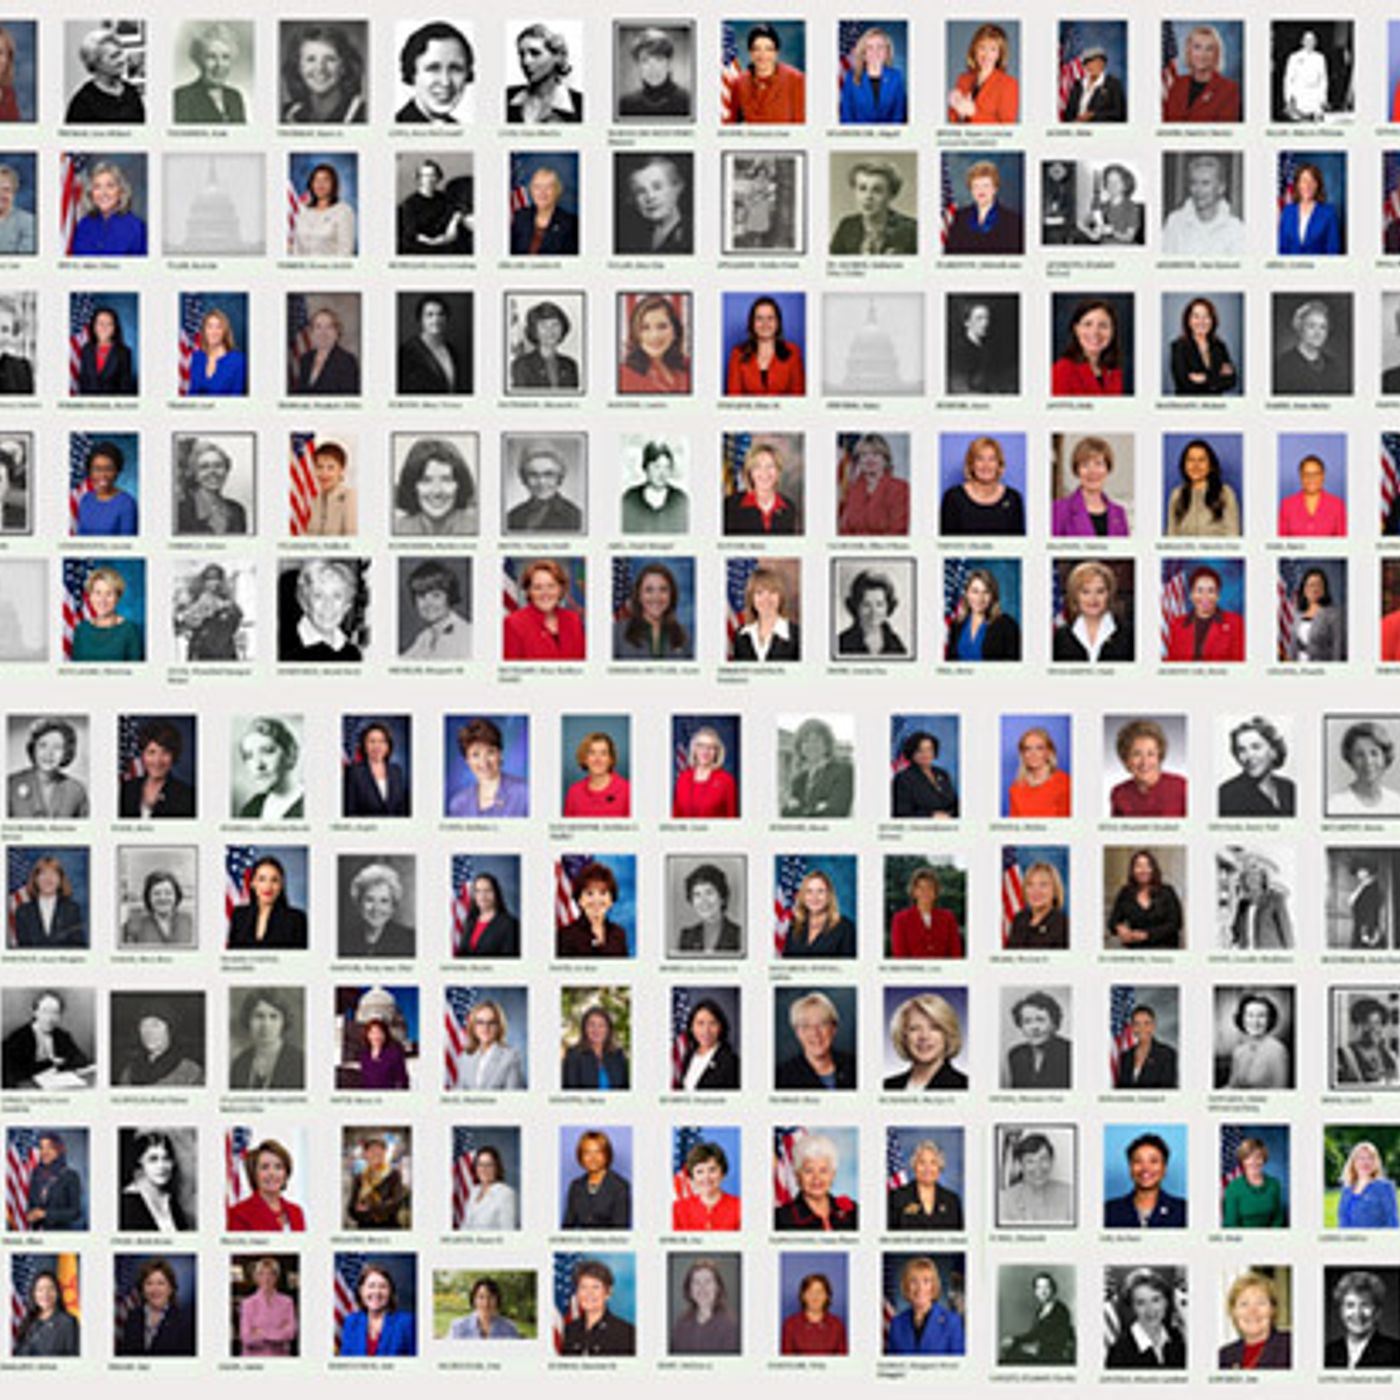 278: The Year of the Woman: A History of Women in Congress